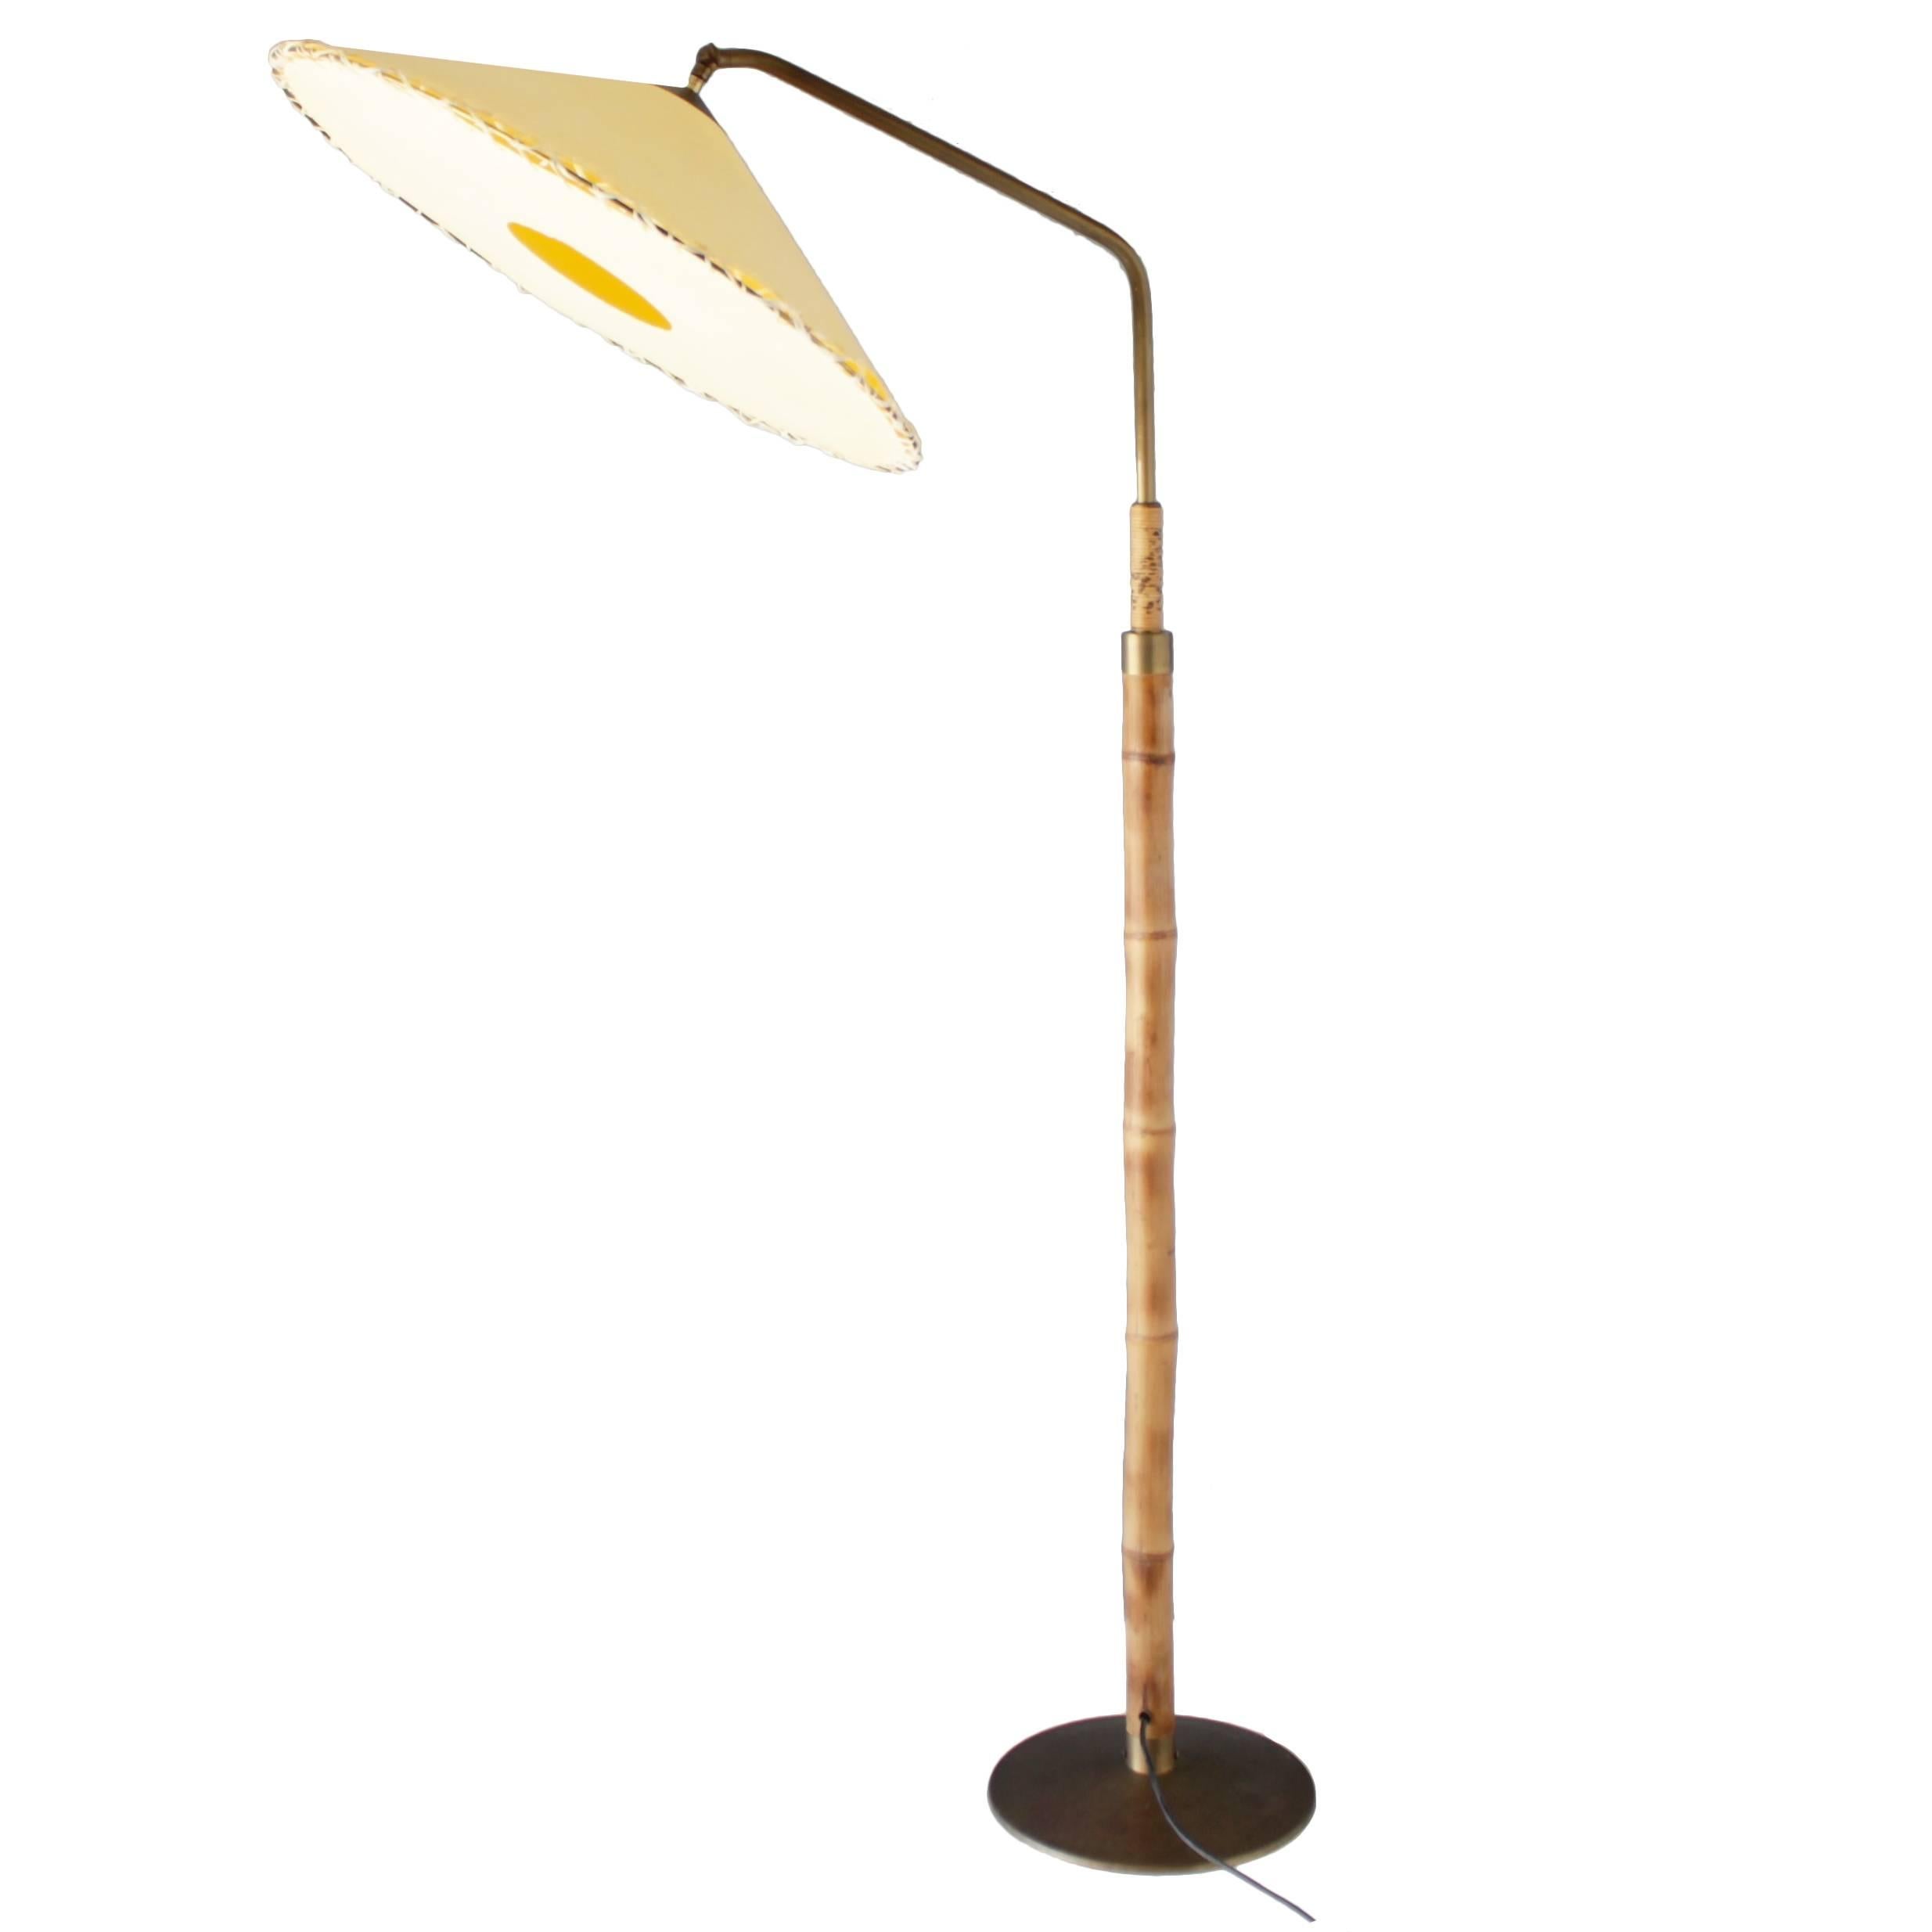 Floor Lamp by Pitt Müller Germany from the 1950s